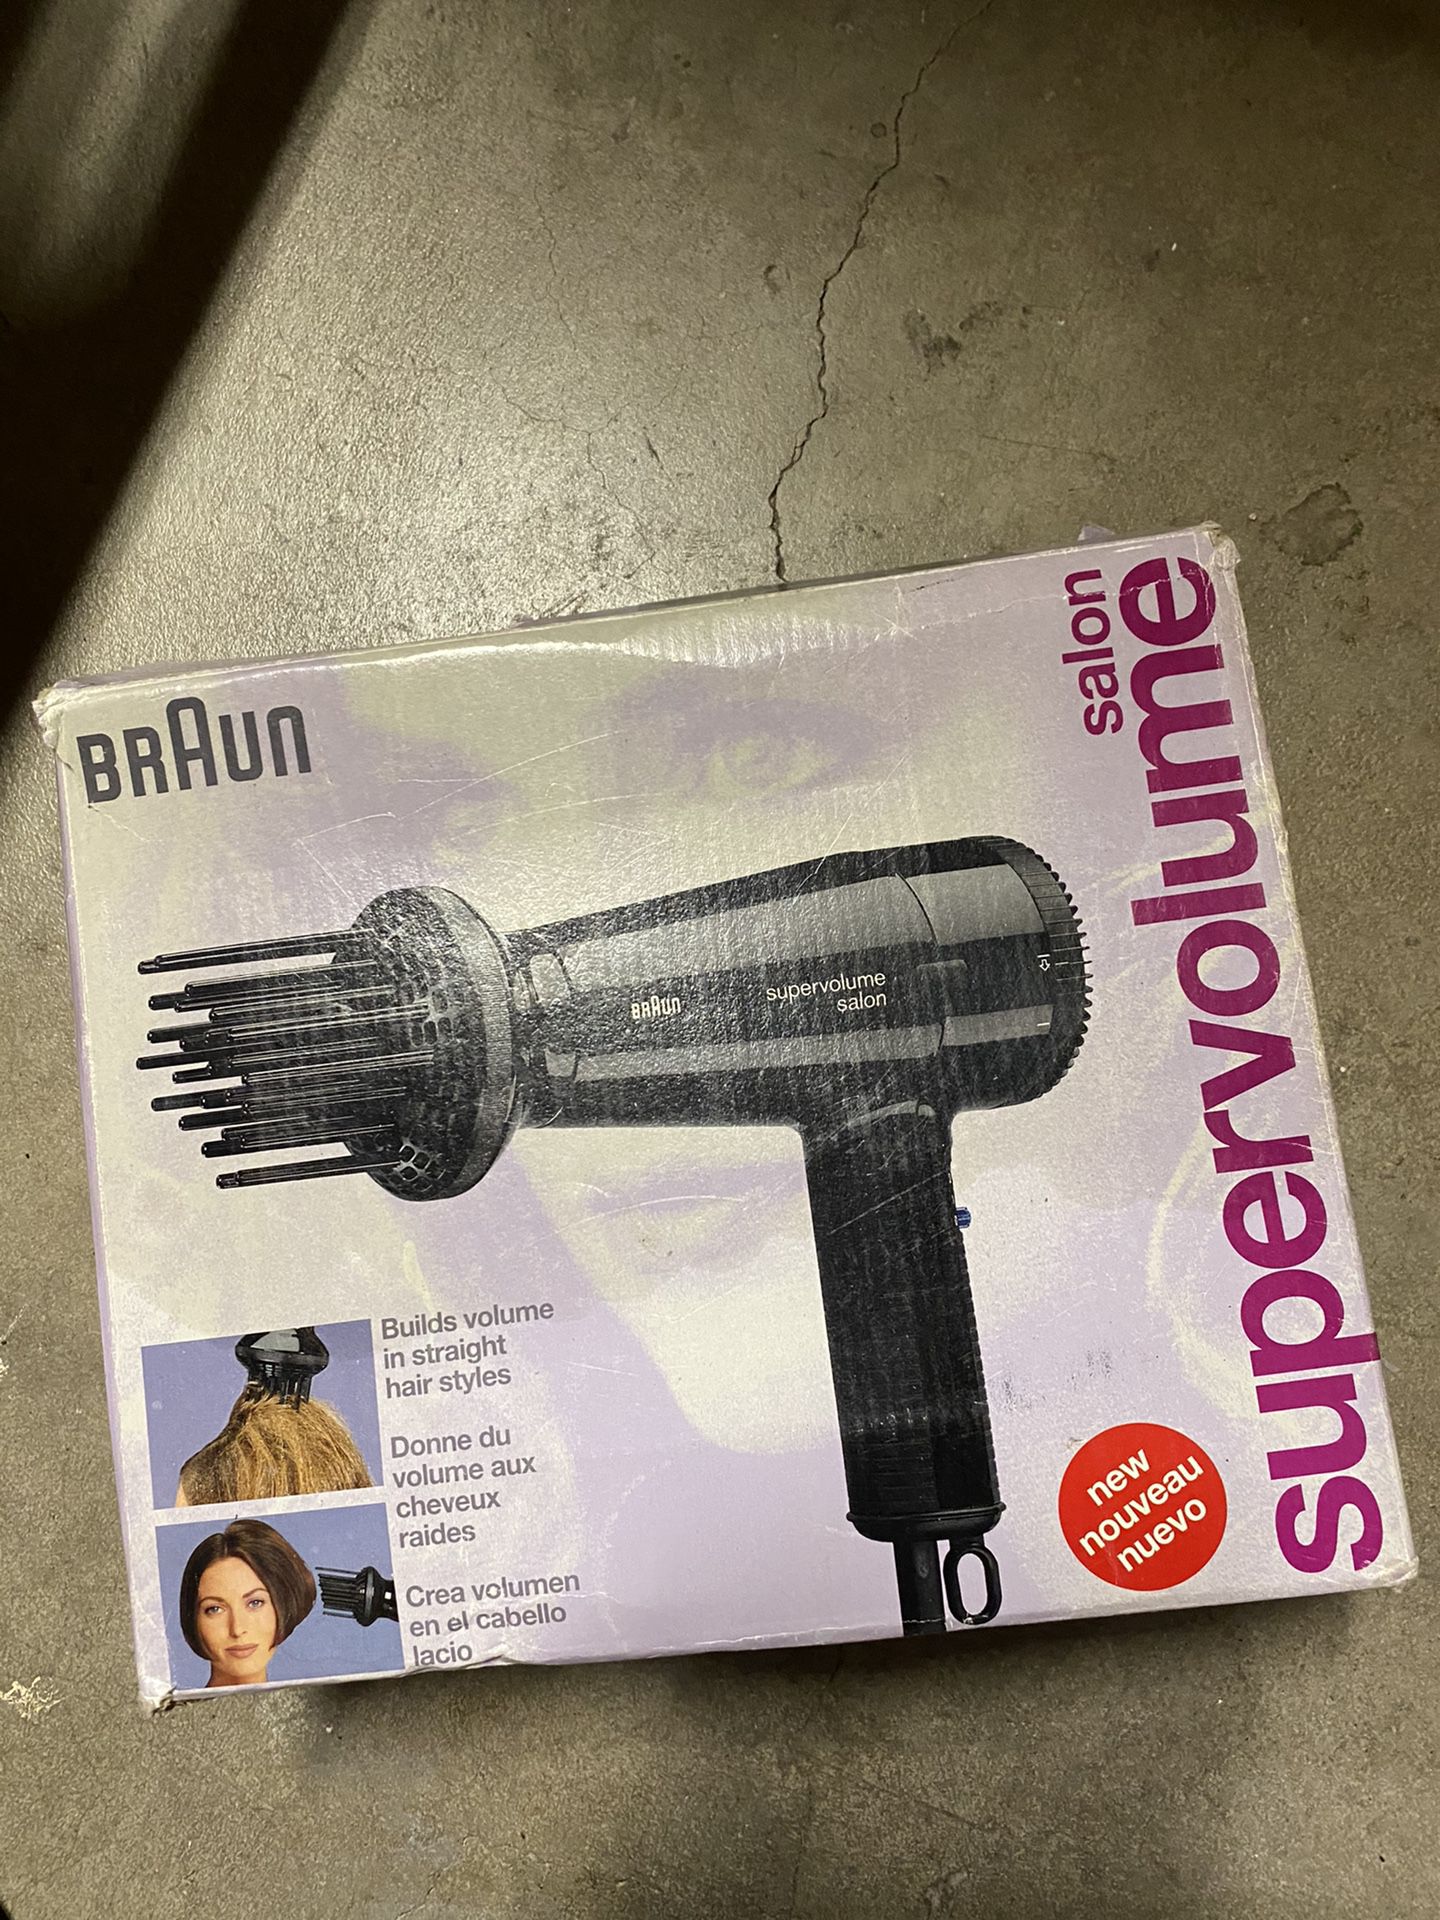  BRAUM Hair  Dryer Super Volume,  In The Box Brand New! ONLY $20